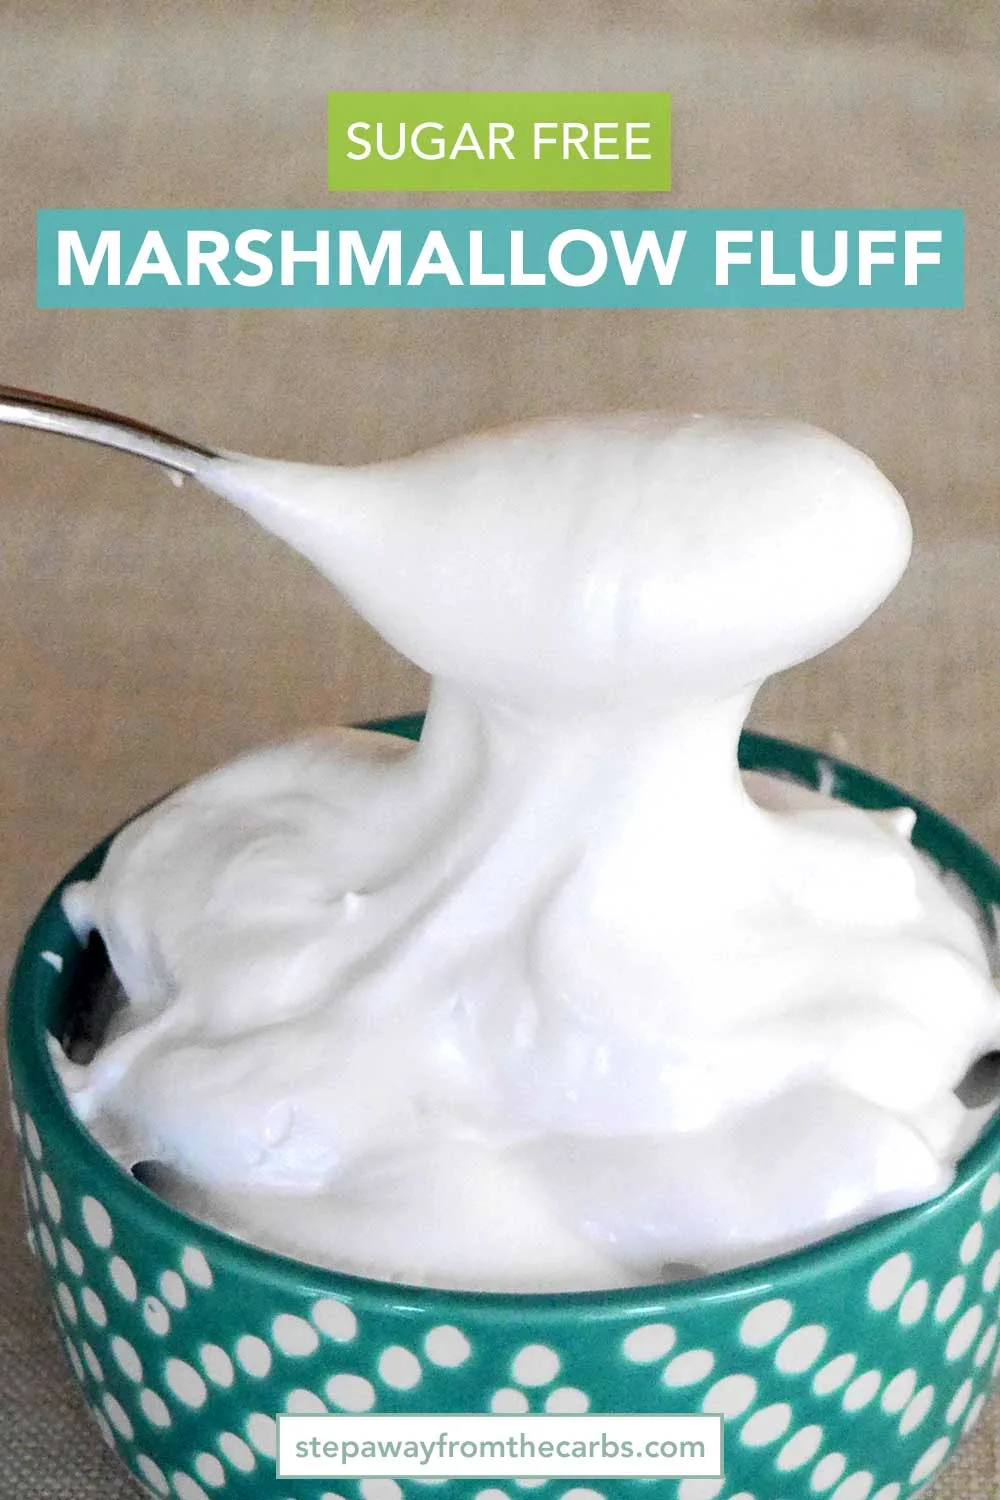 How to Make Marshmallow Fluff in 5 Easy Steps